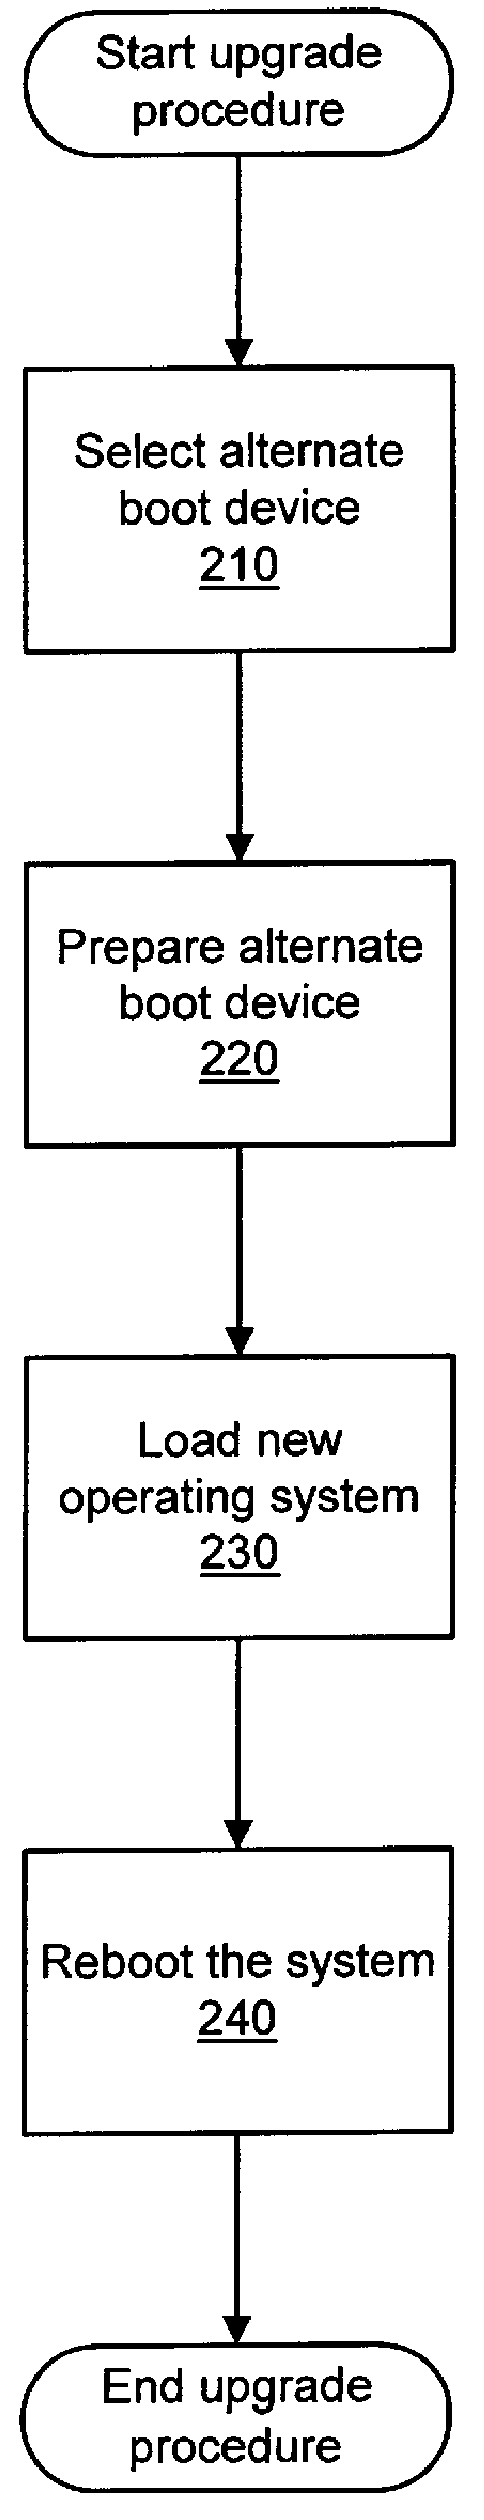 Installing operating systems changes on a computer system